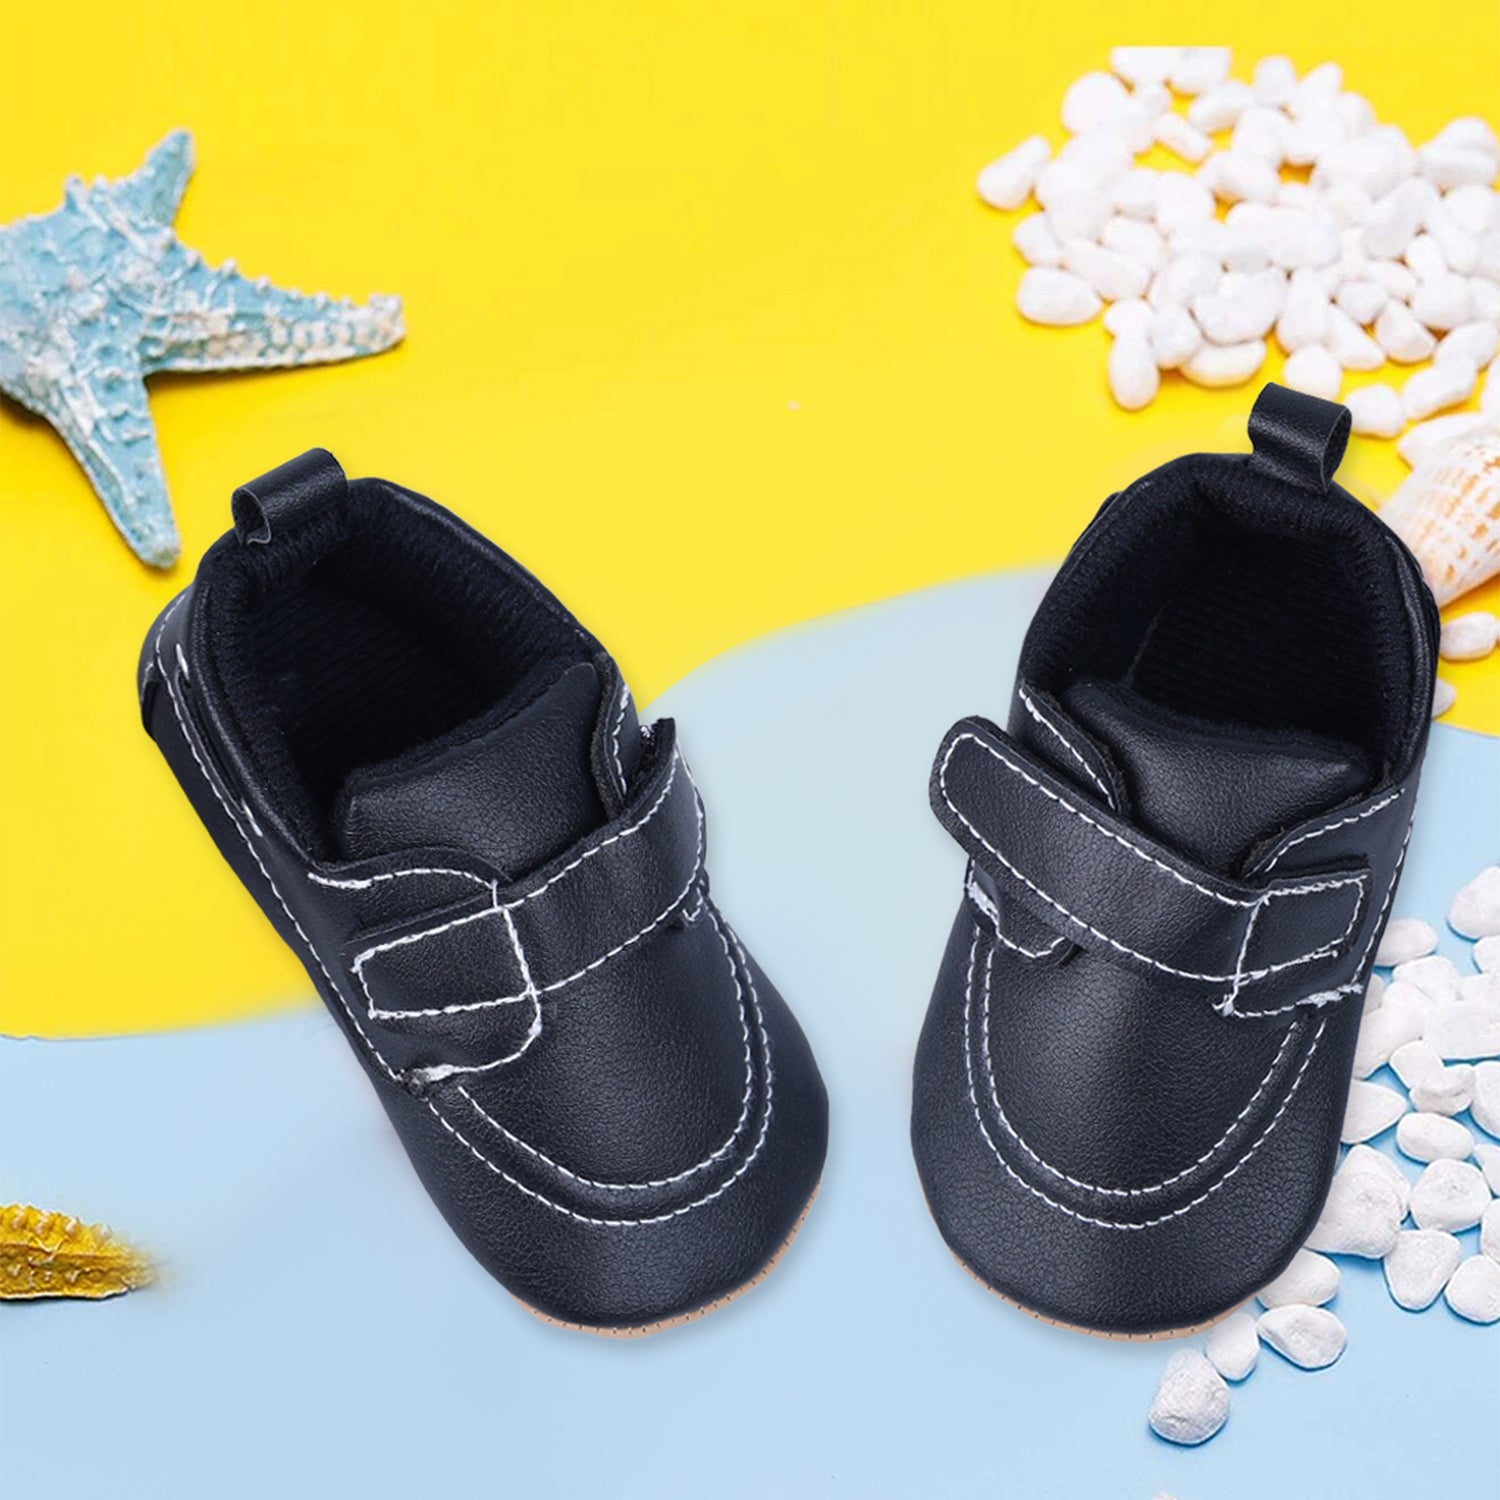 Baby Moo Solid Hookloop Stylish Leather Velcro Shoes - Black